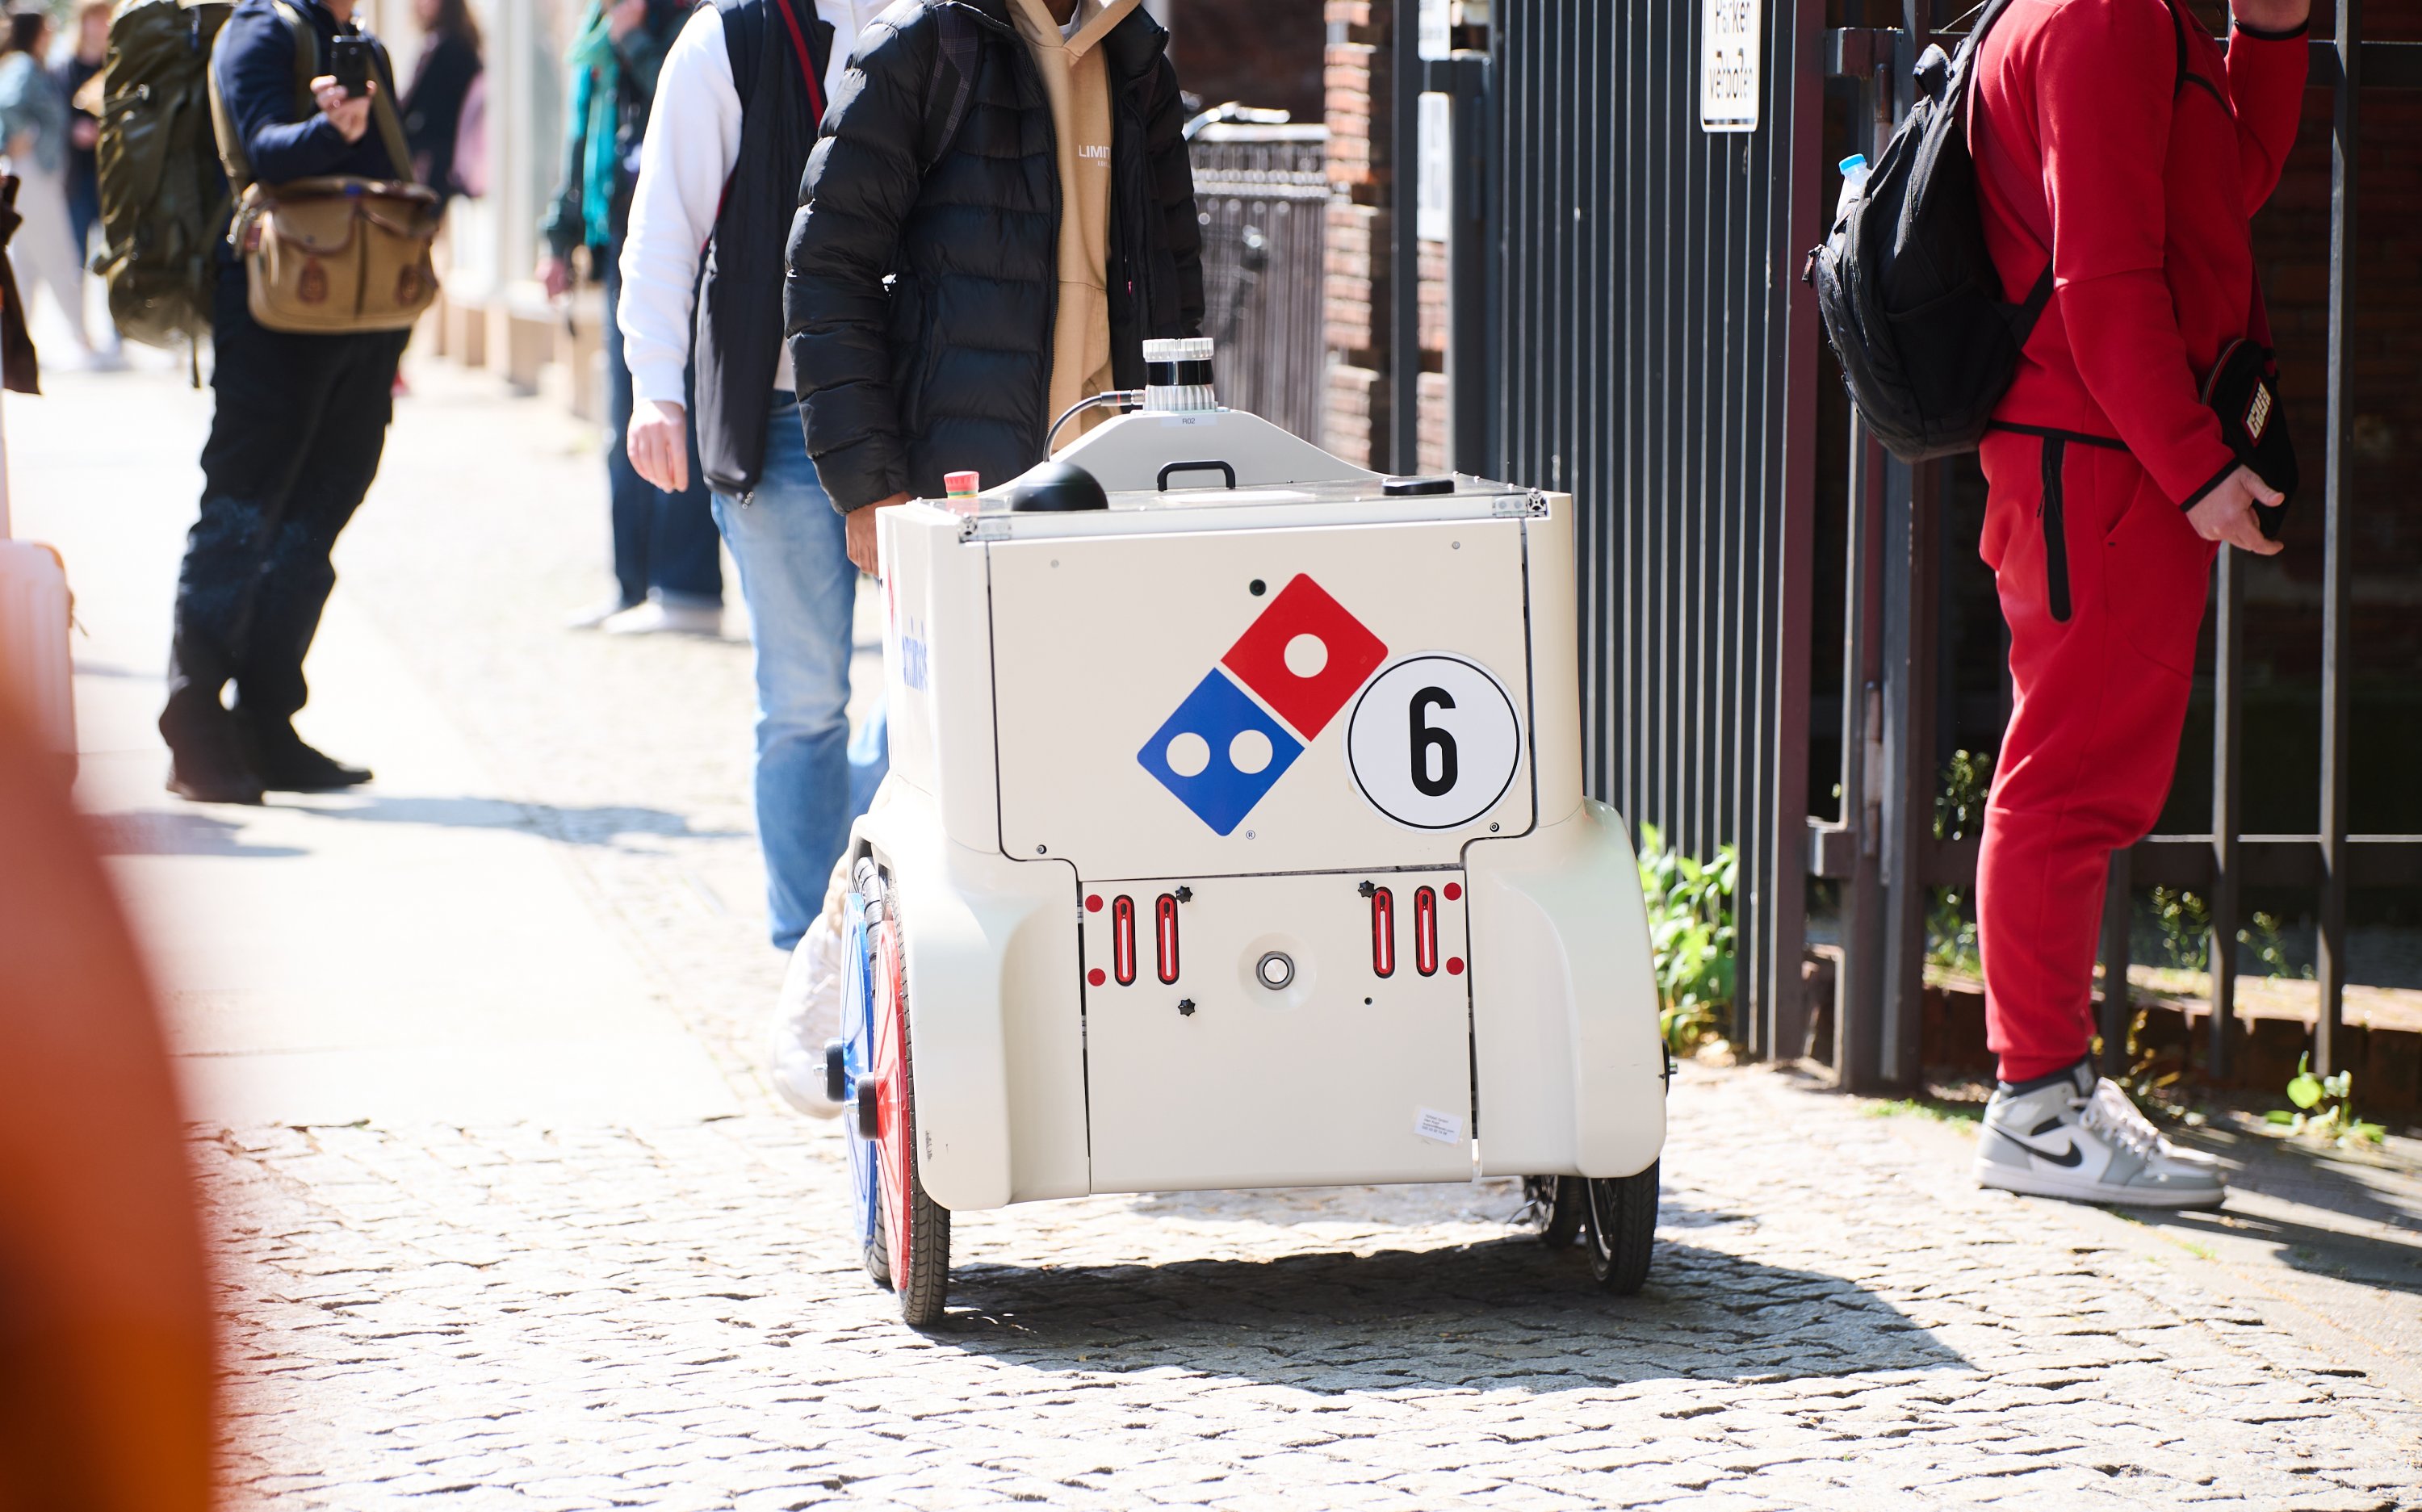 Domino's waist-high pizza delivery droid has four sensors and several cameras which allow it to detect when people or other obstacles block its path, Berlin, Germany, May 2, 2022. (DPA Photo)